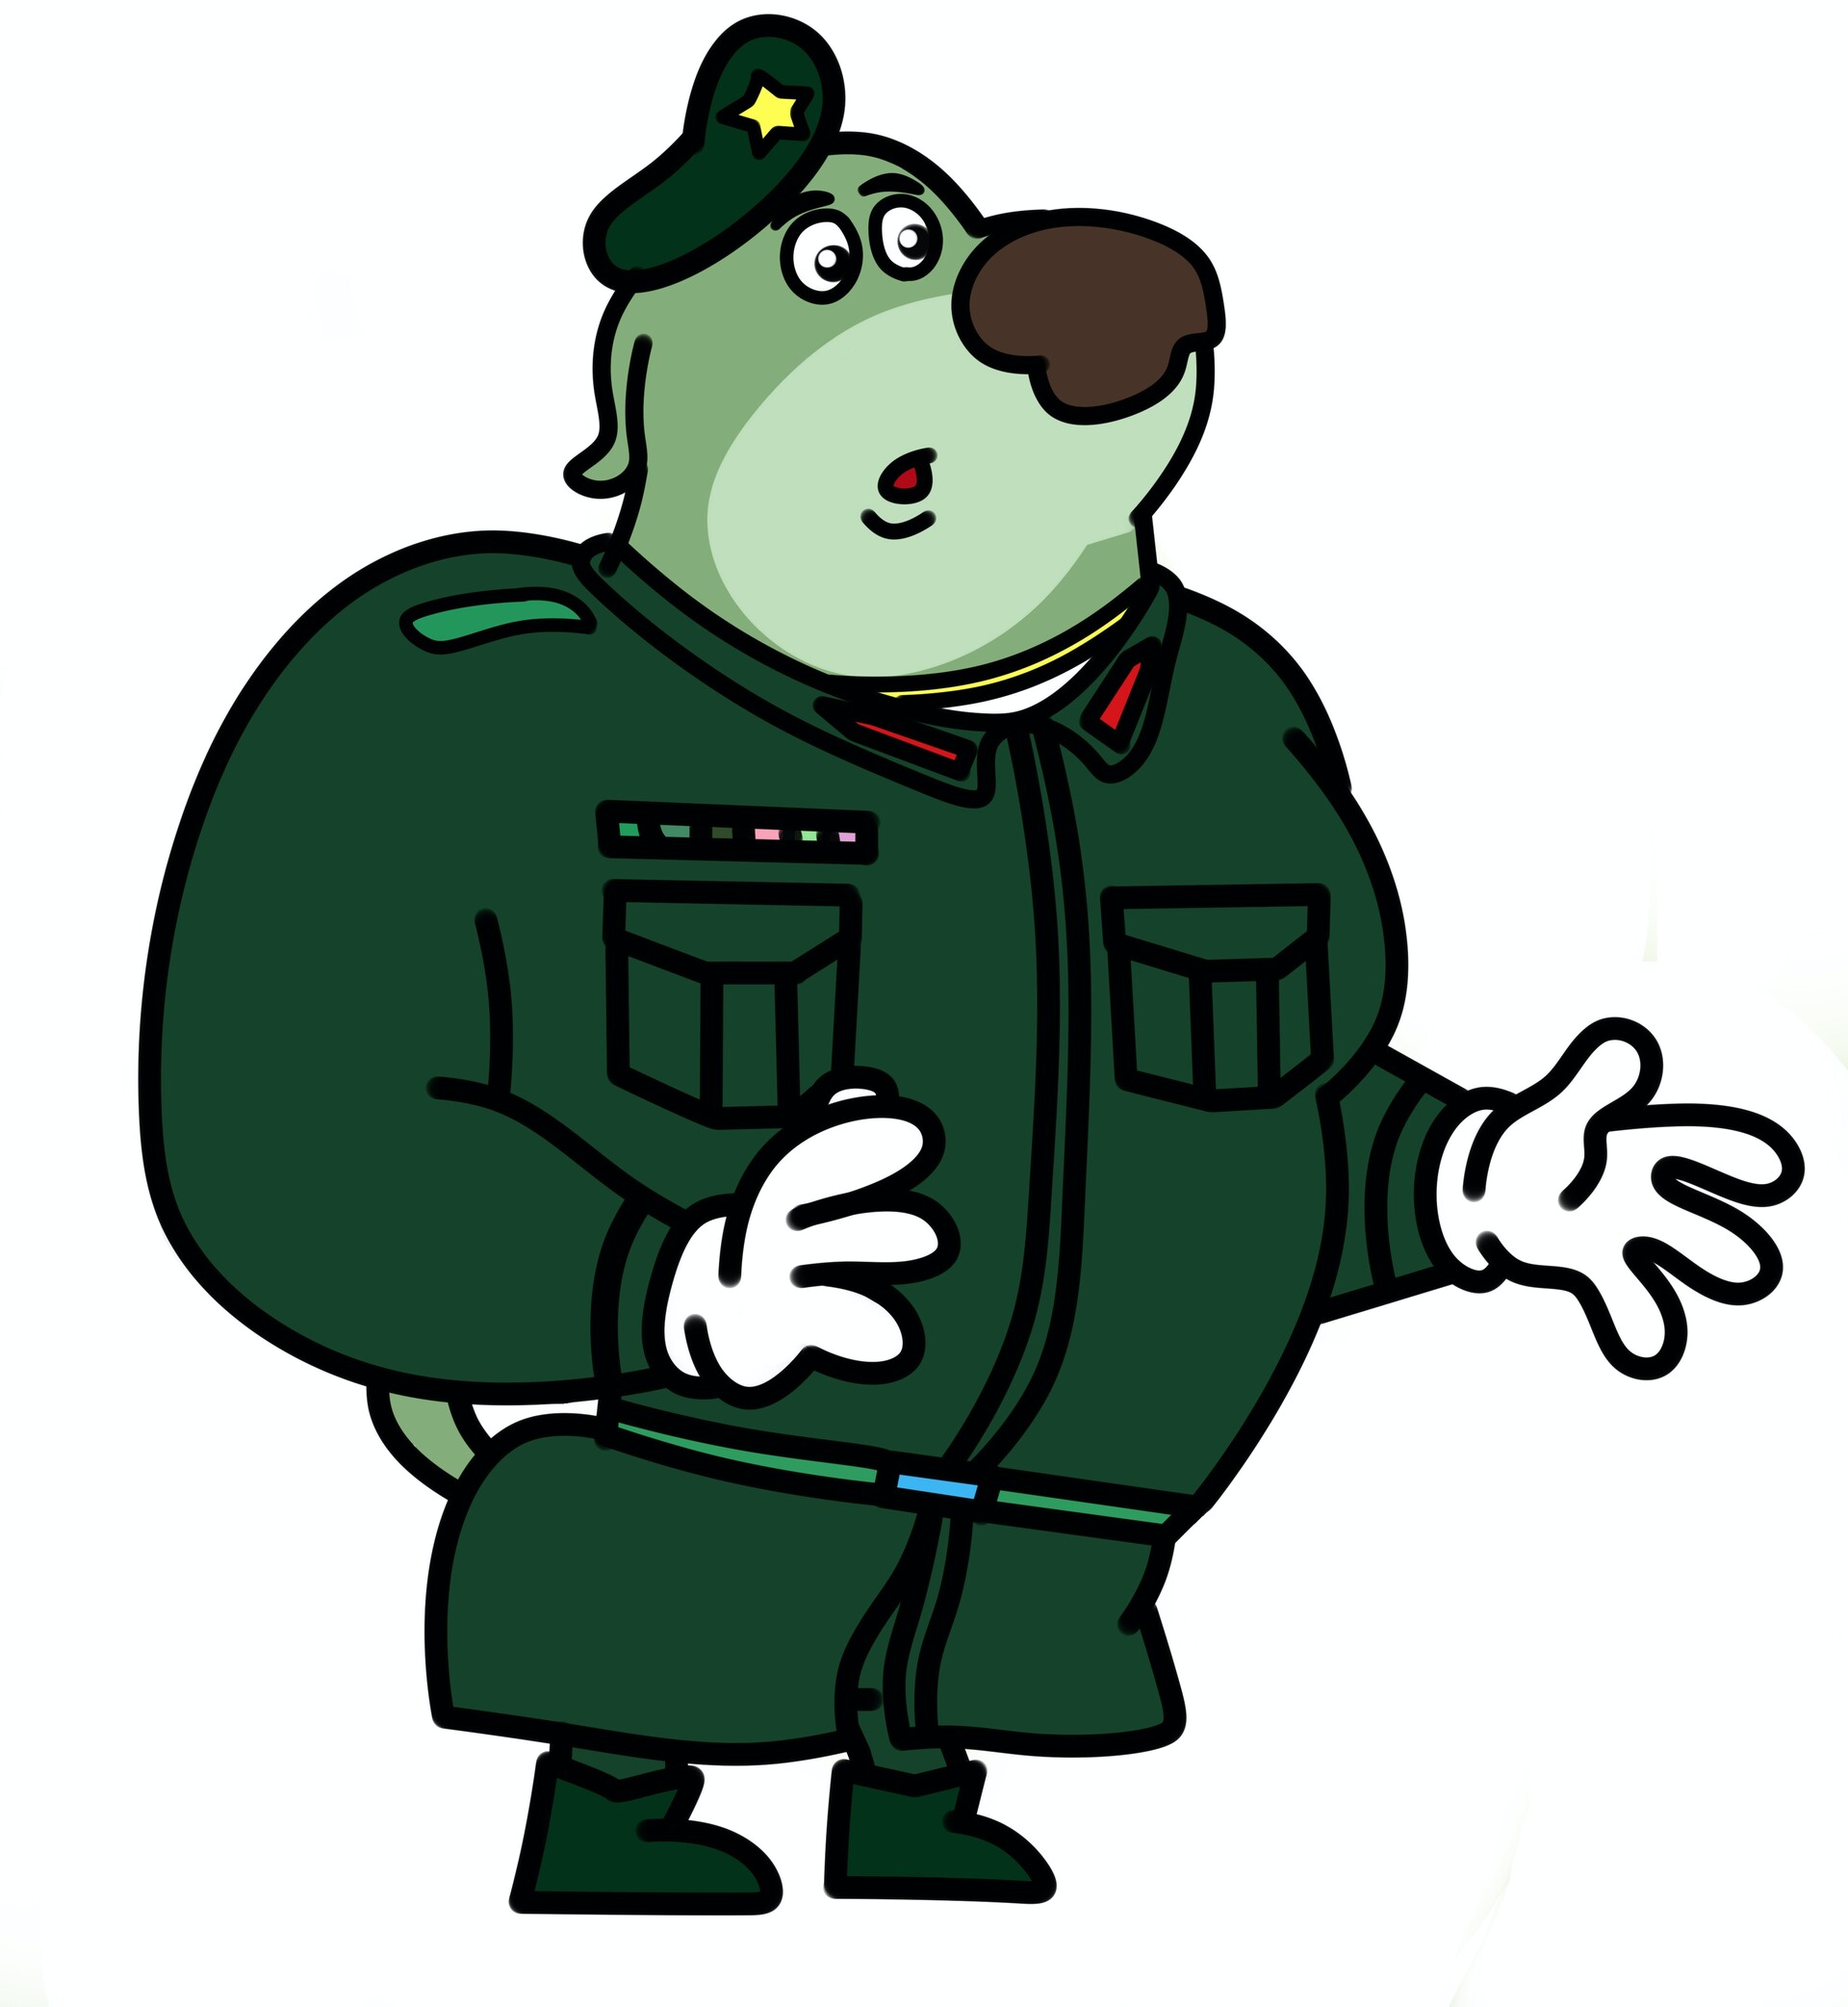 ArtStation - dog a tat the rat a tat Colonel doggert commander soldier army dog  green character